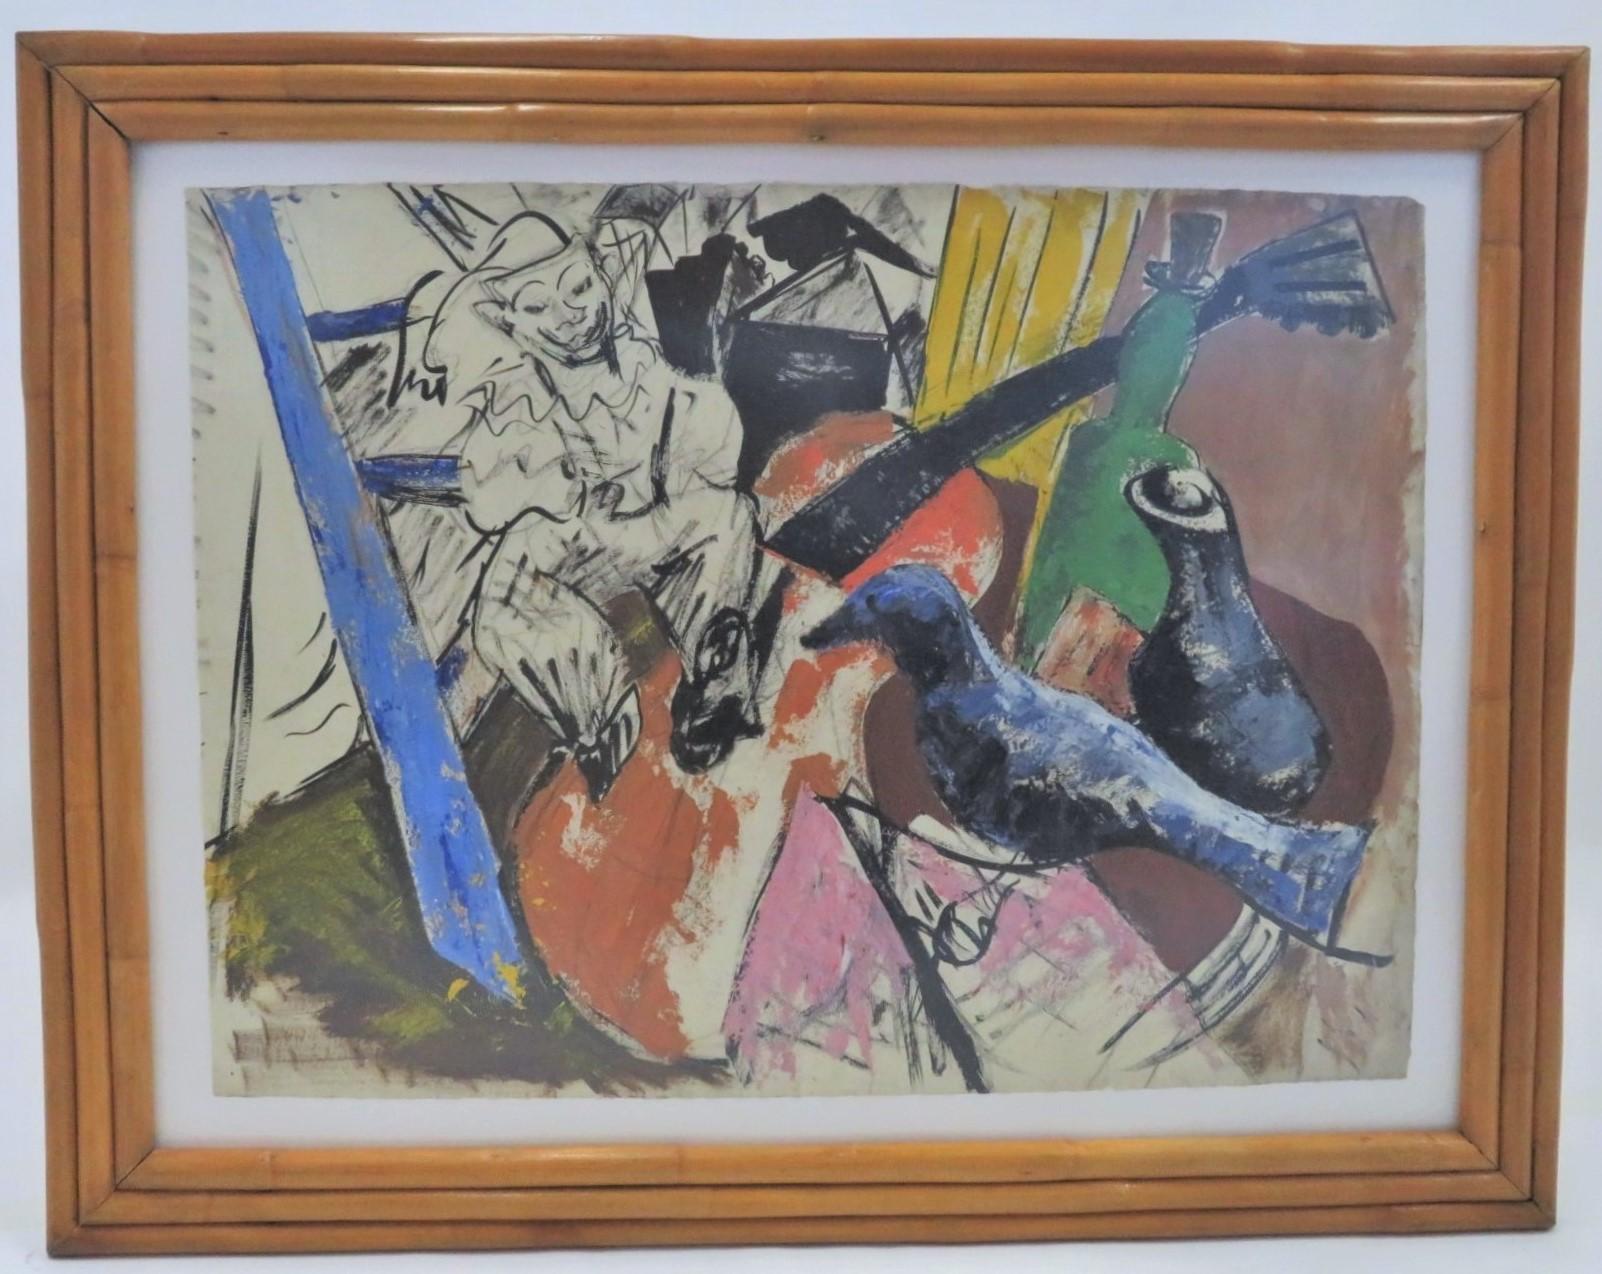 Mid-Century Modern Surreal creation by an anonymous New York artist from the 1950s.  The work depicts a surreal scene with doll or puppet, bird, guitar, bottles in a palette of yellow, blues, pink, tan, brown, green with heavy black outlines.  The